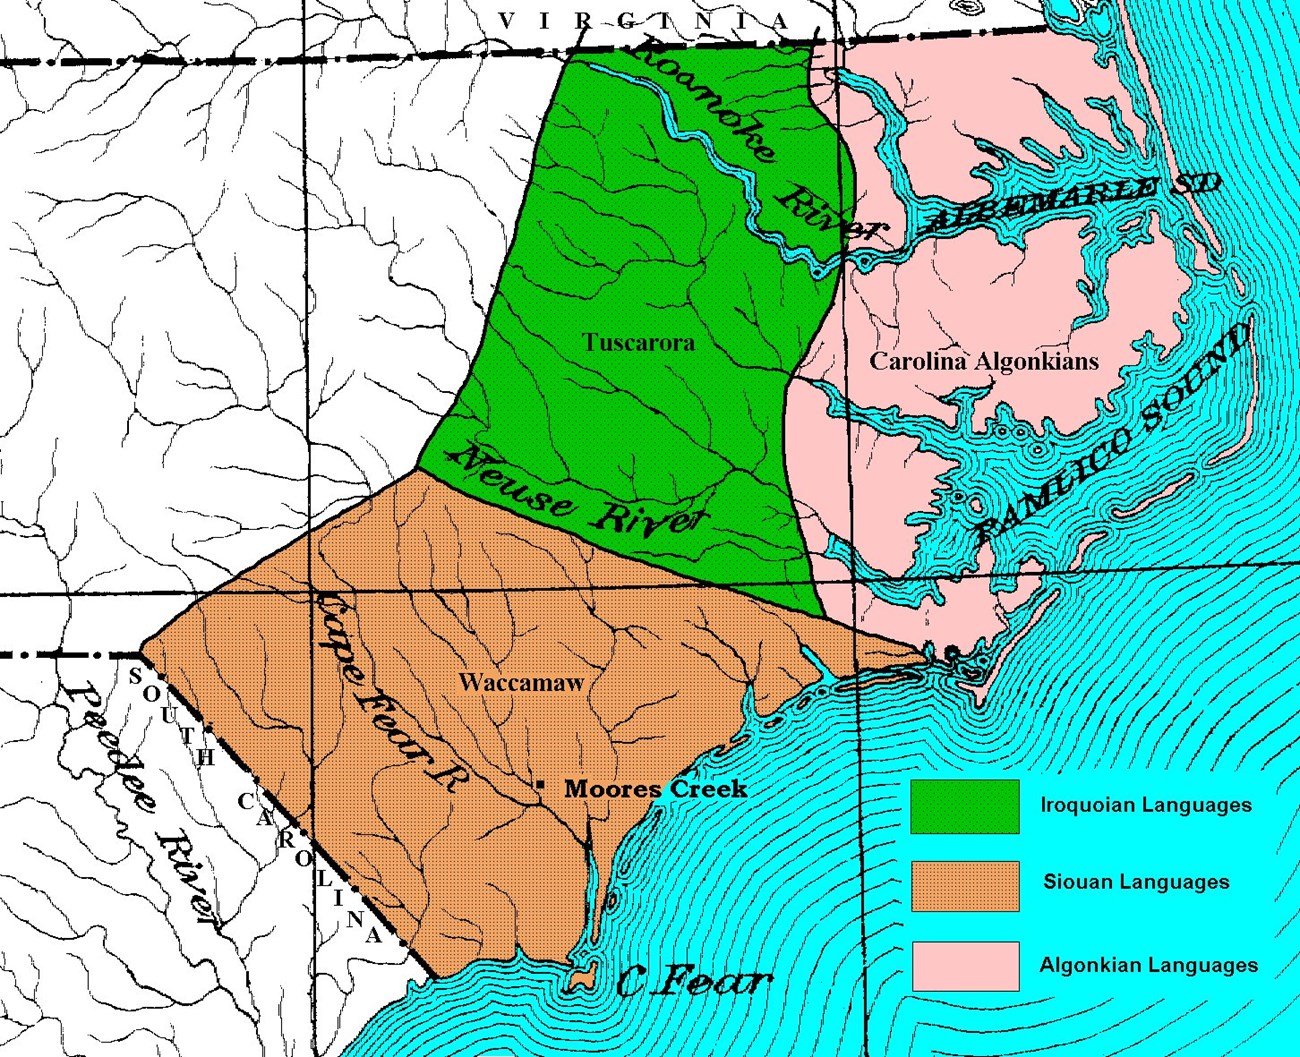 Image 1. Map showing general distribution of major linguistic groups of the North Carolina Coastal Plain (after Phelps 1983, Figure 1.8)